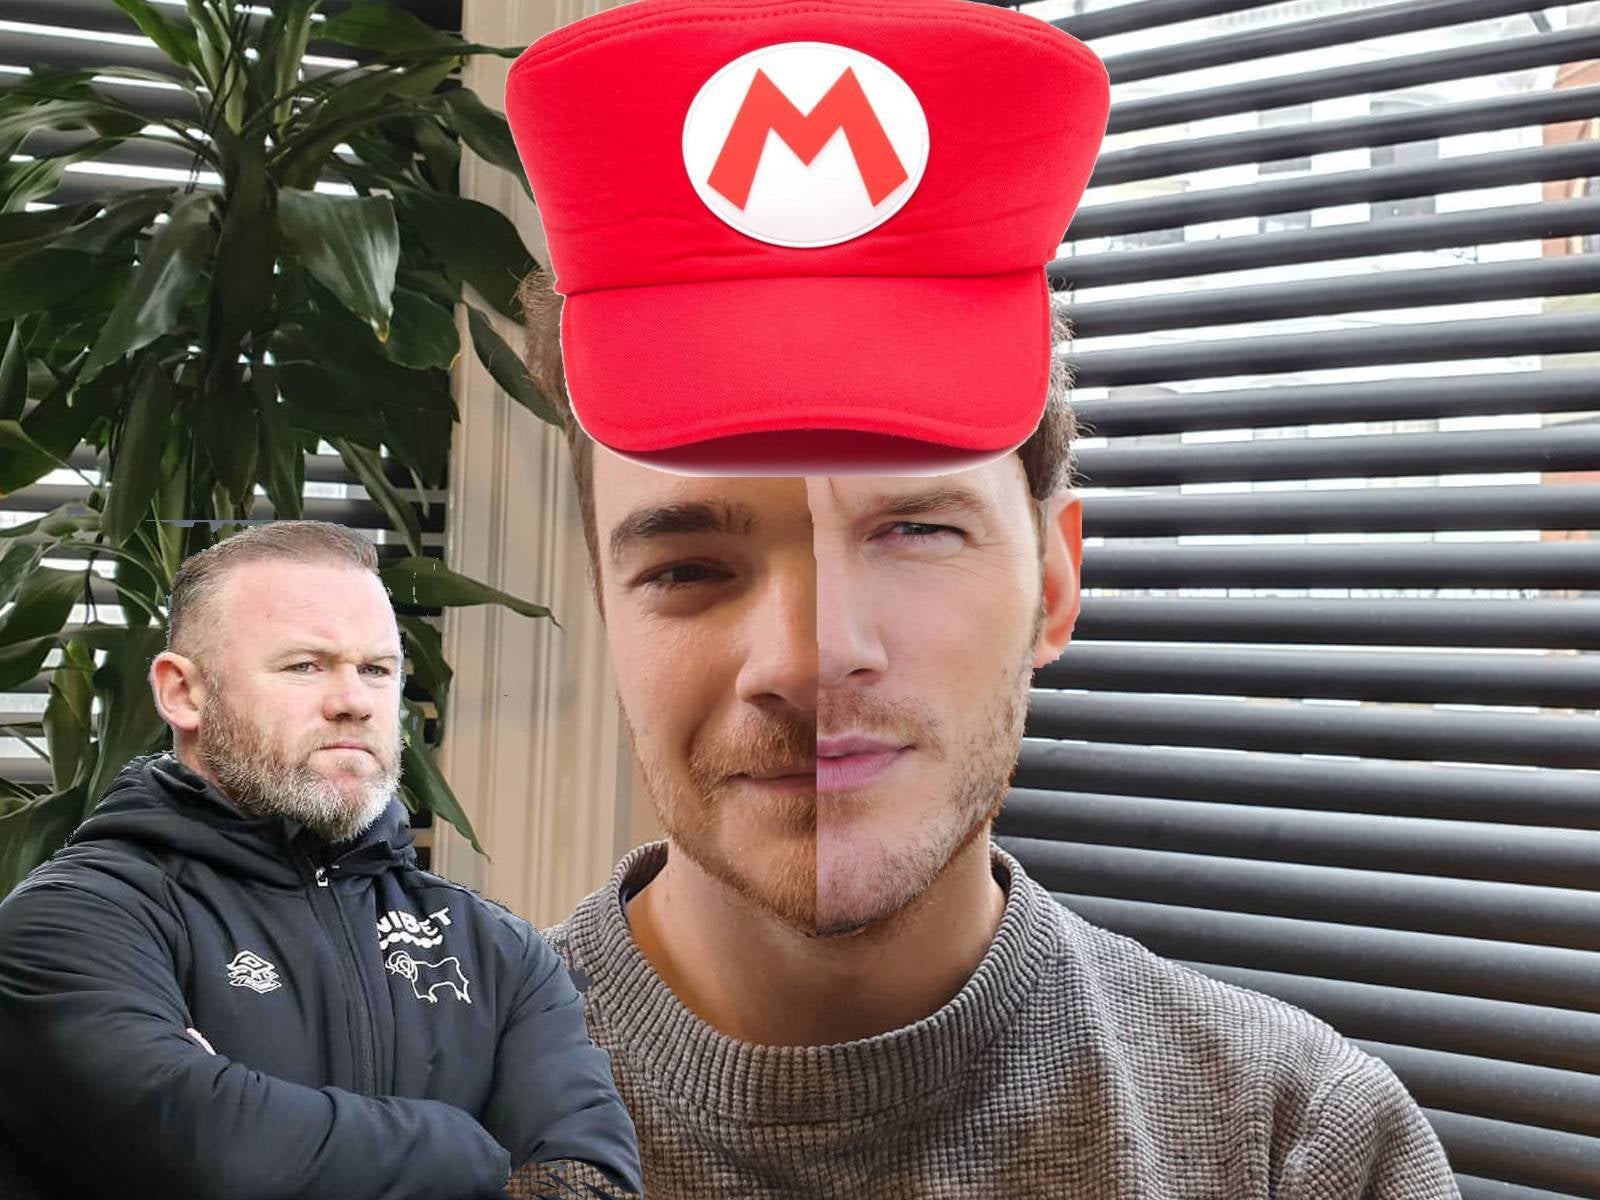 Chris Bratt from People Make Games starring as Mario while fused with Chris Pratt and being looked at by Wayne Rooney.